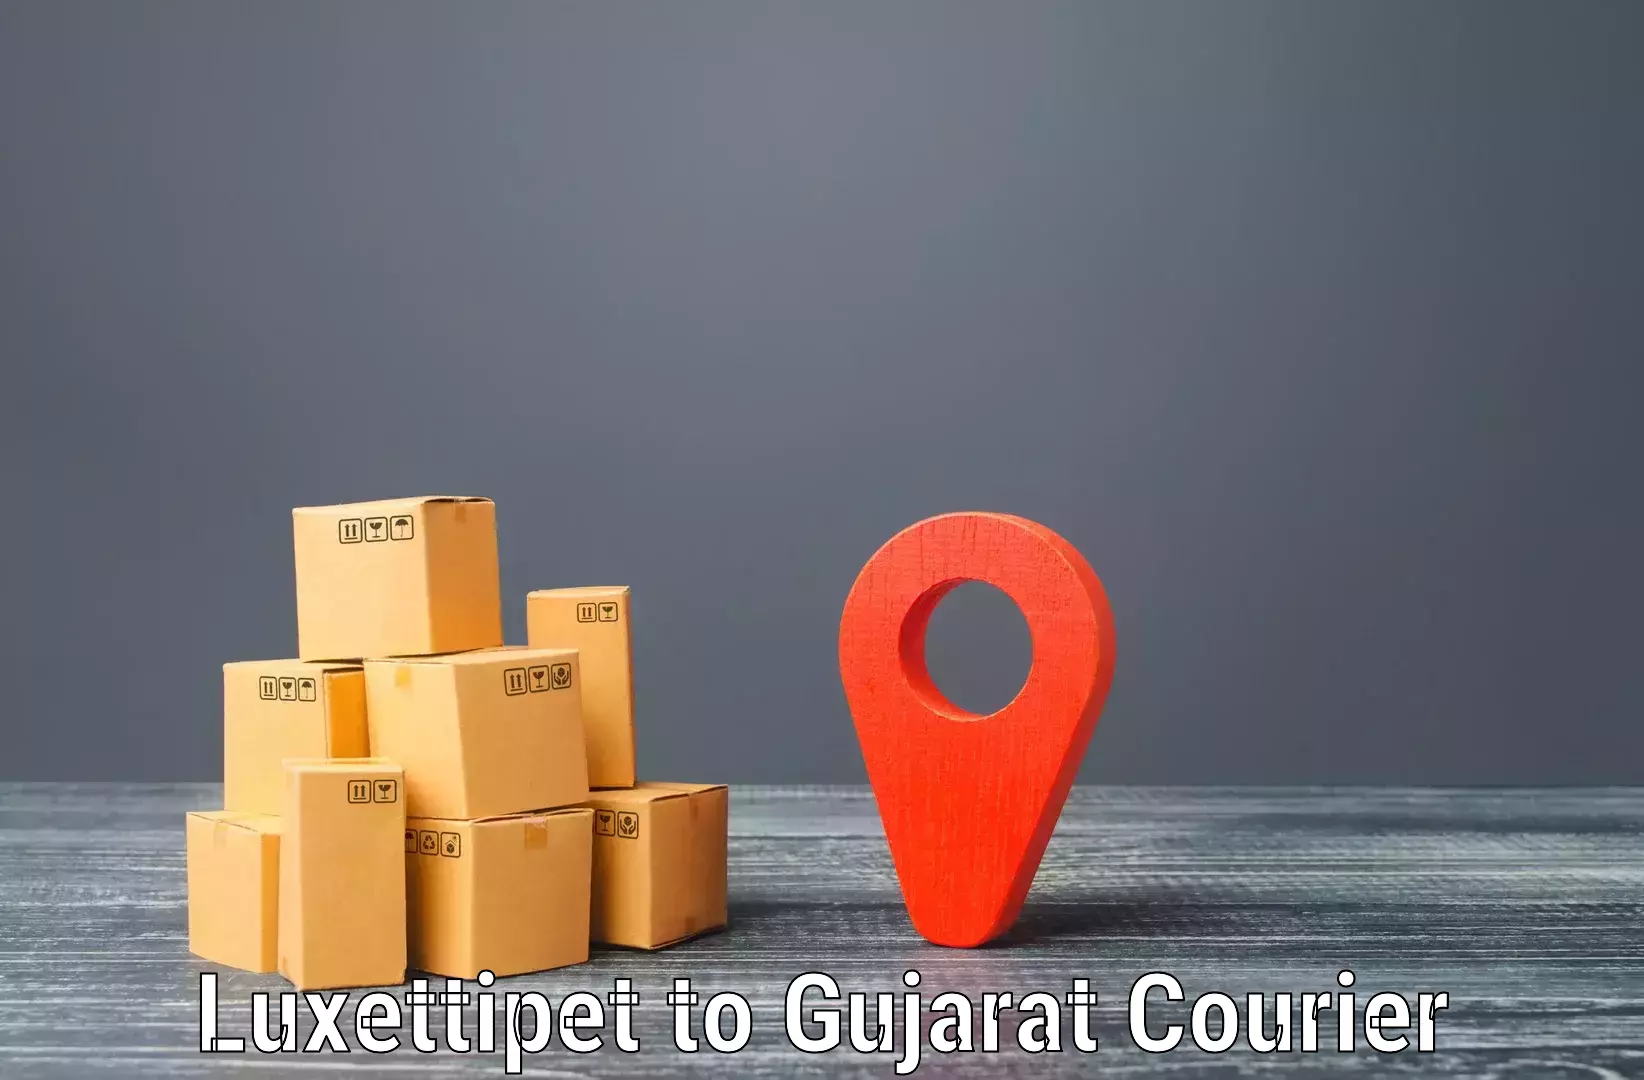 Online shipping calculator Luxettipet to Dharampur Valsad